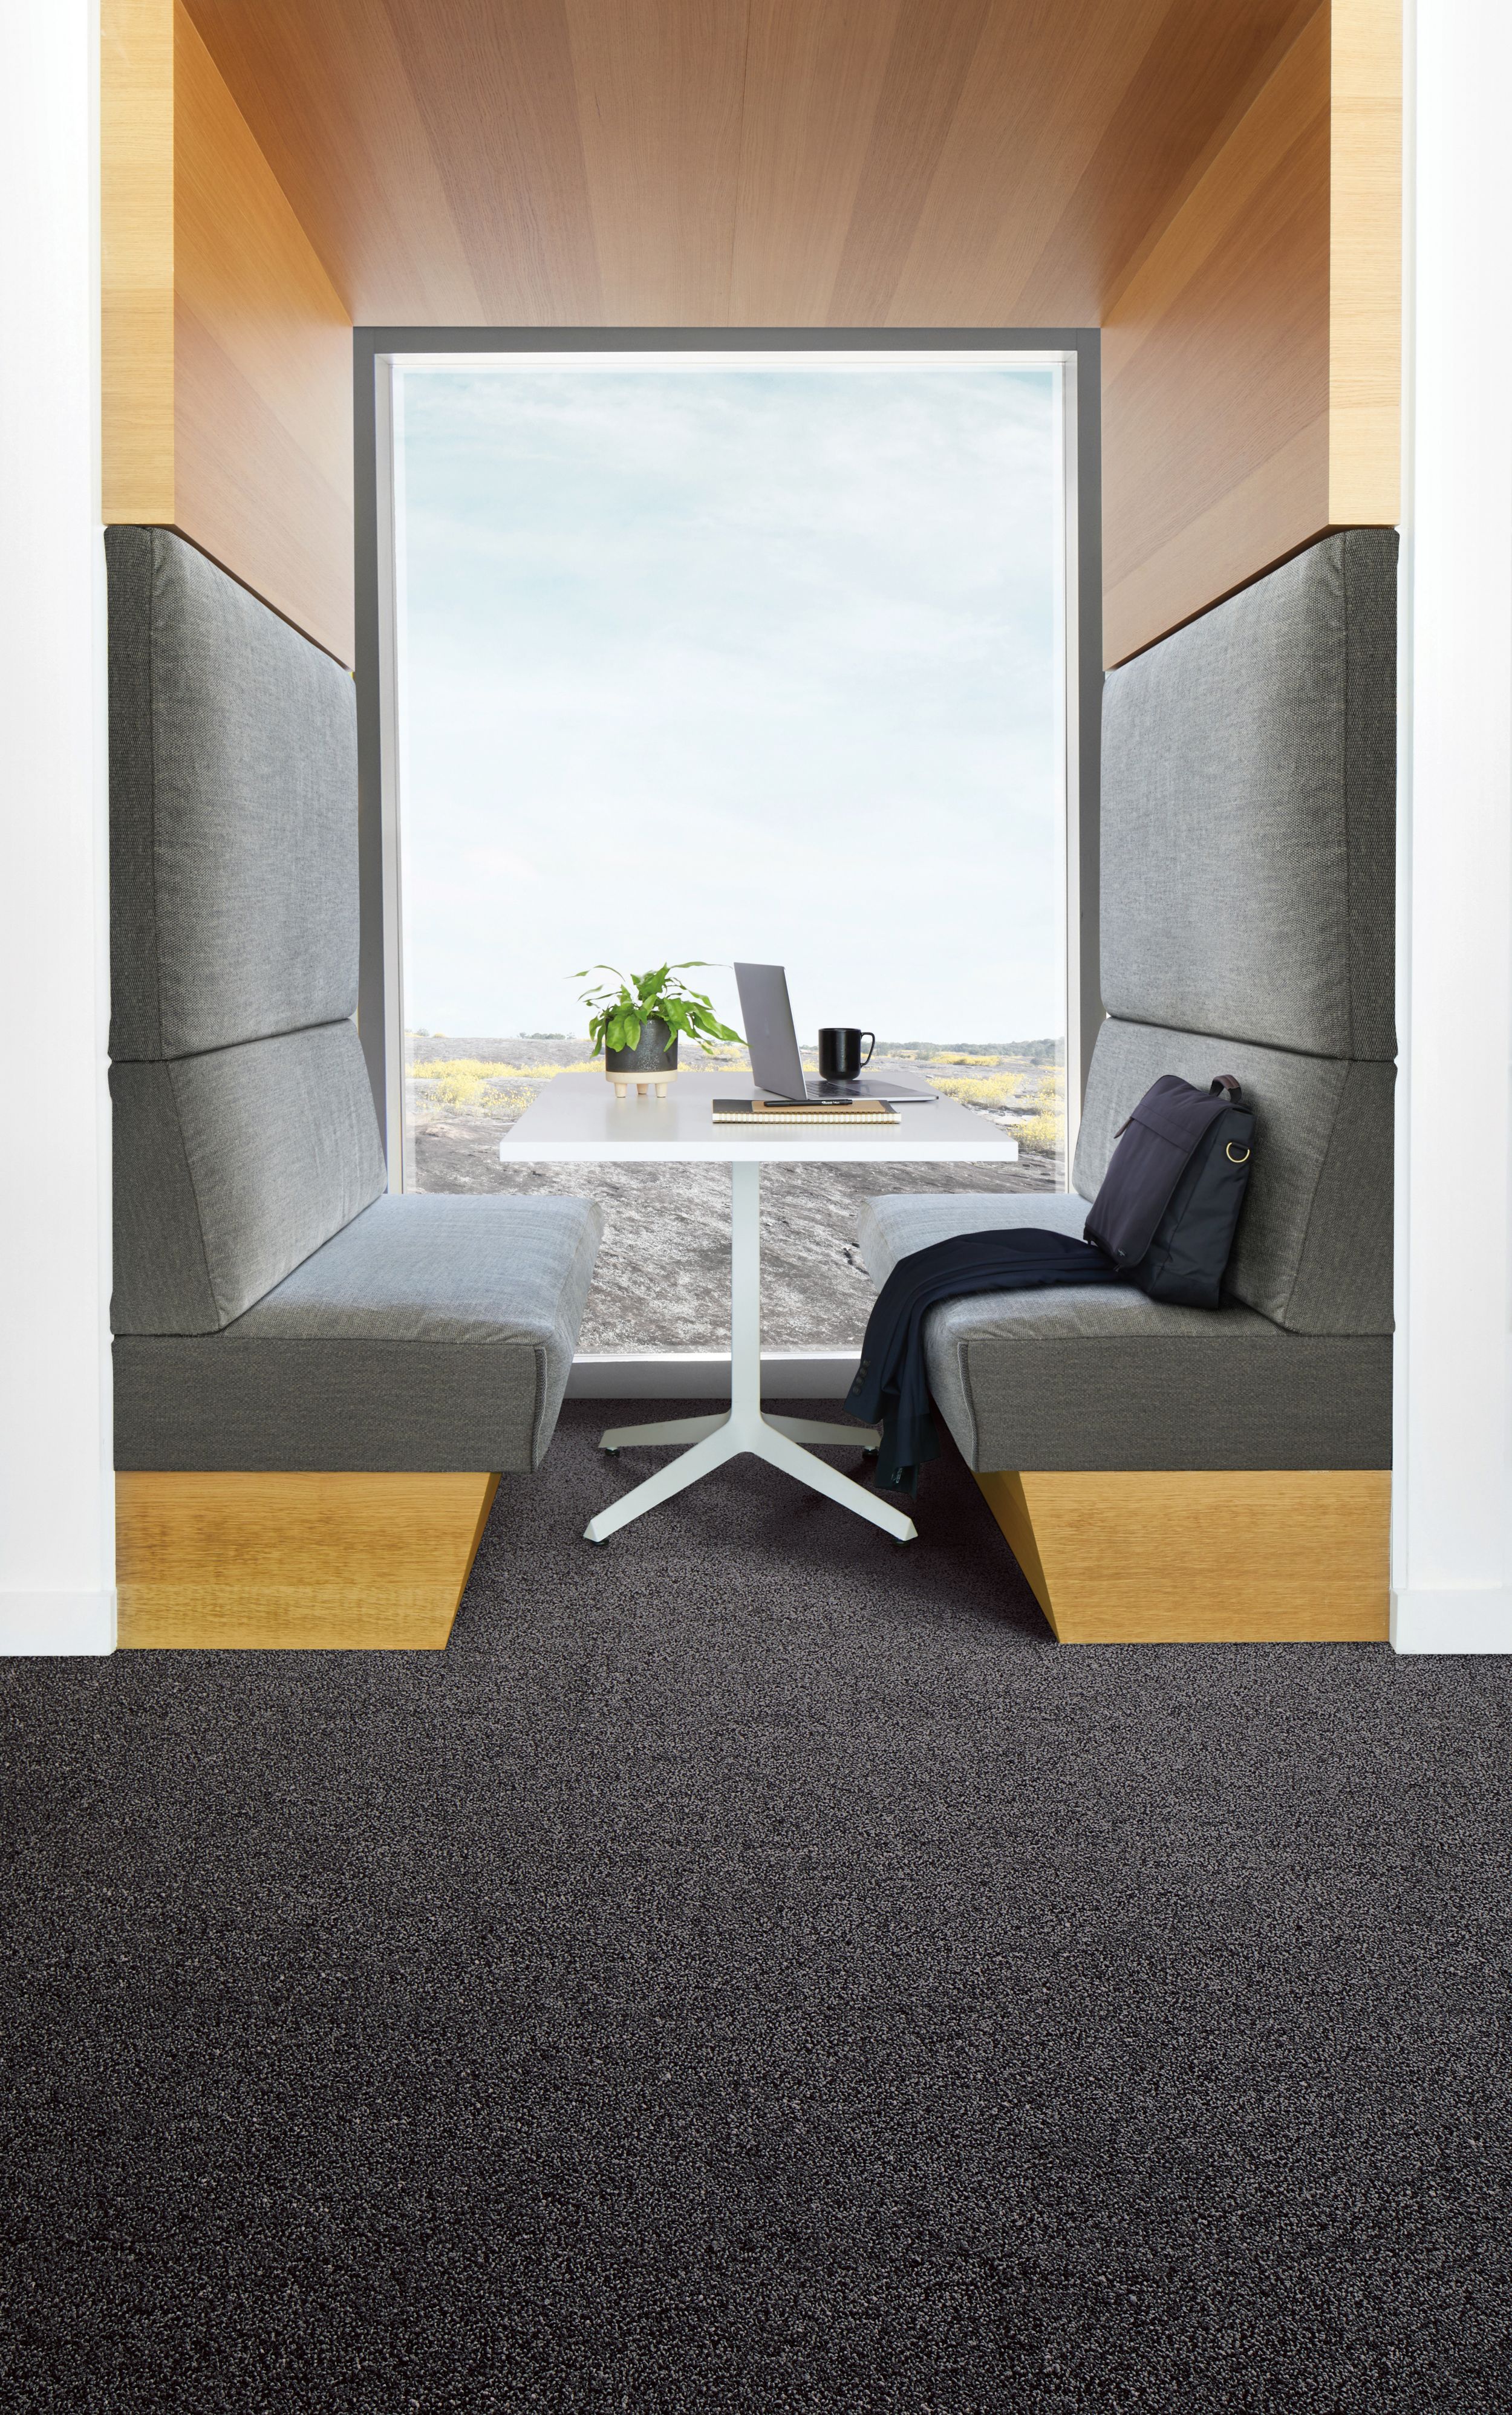 Interface Rockland Road plank carpet tile in booth numéro d’image 1